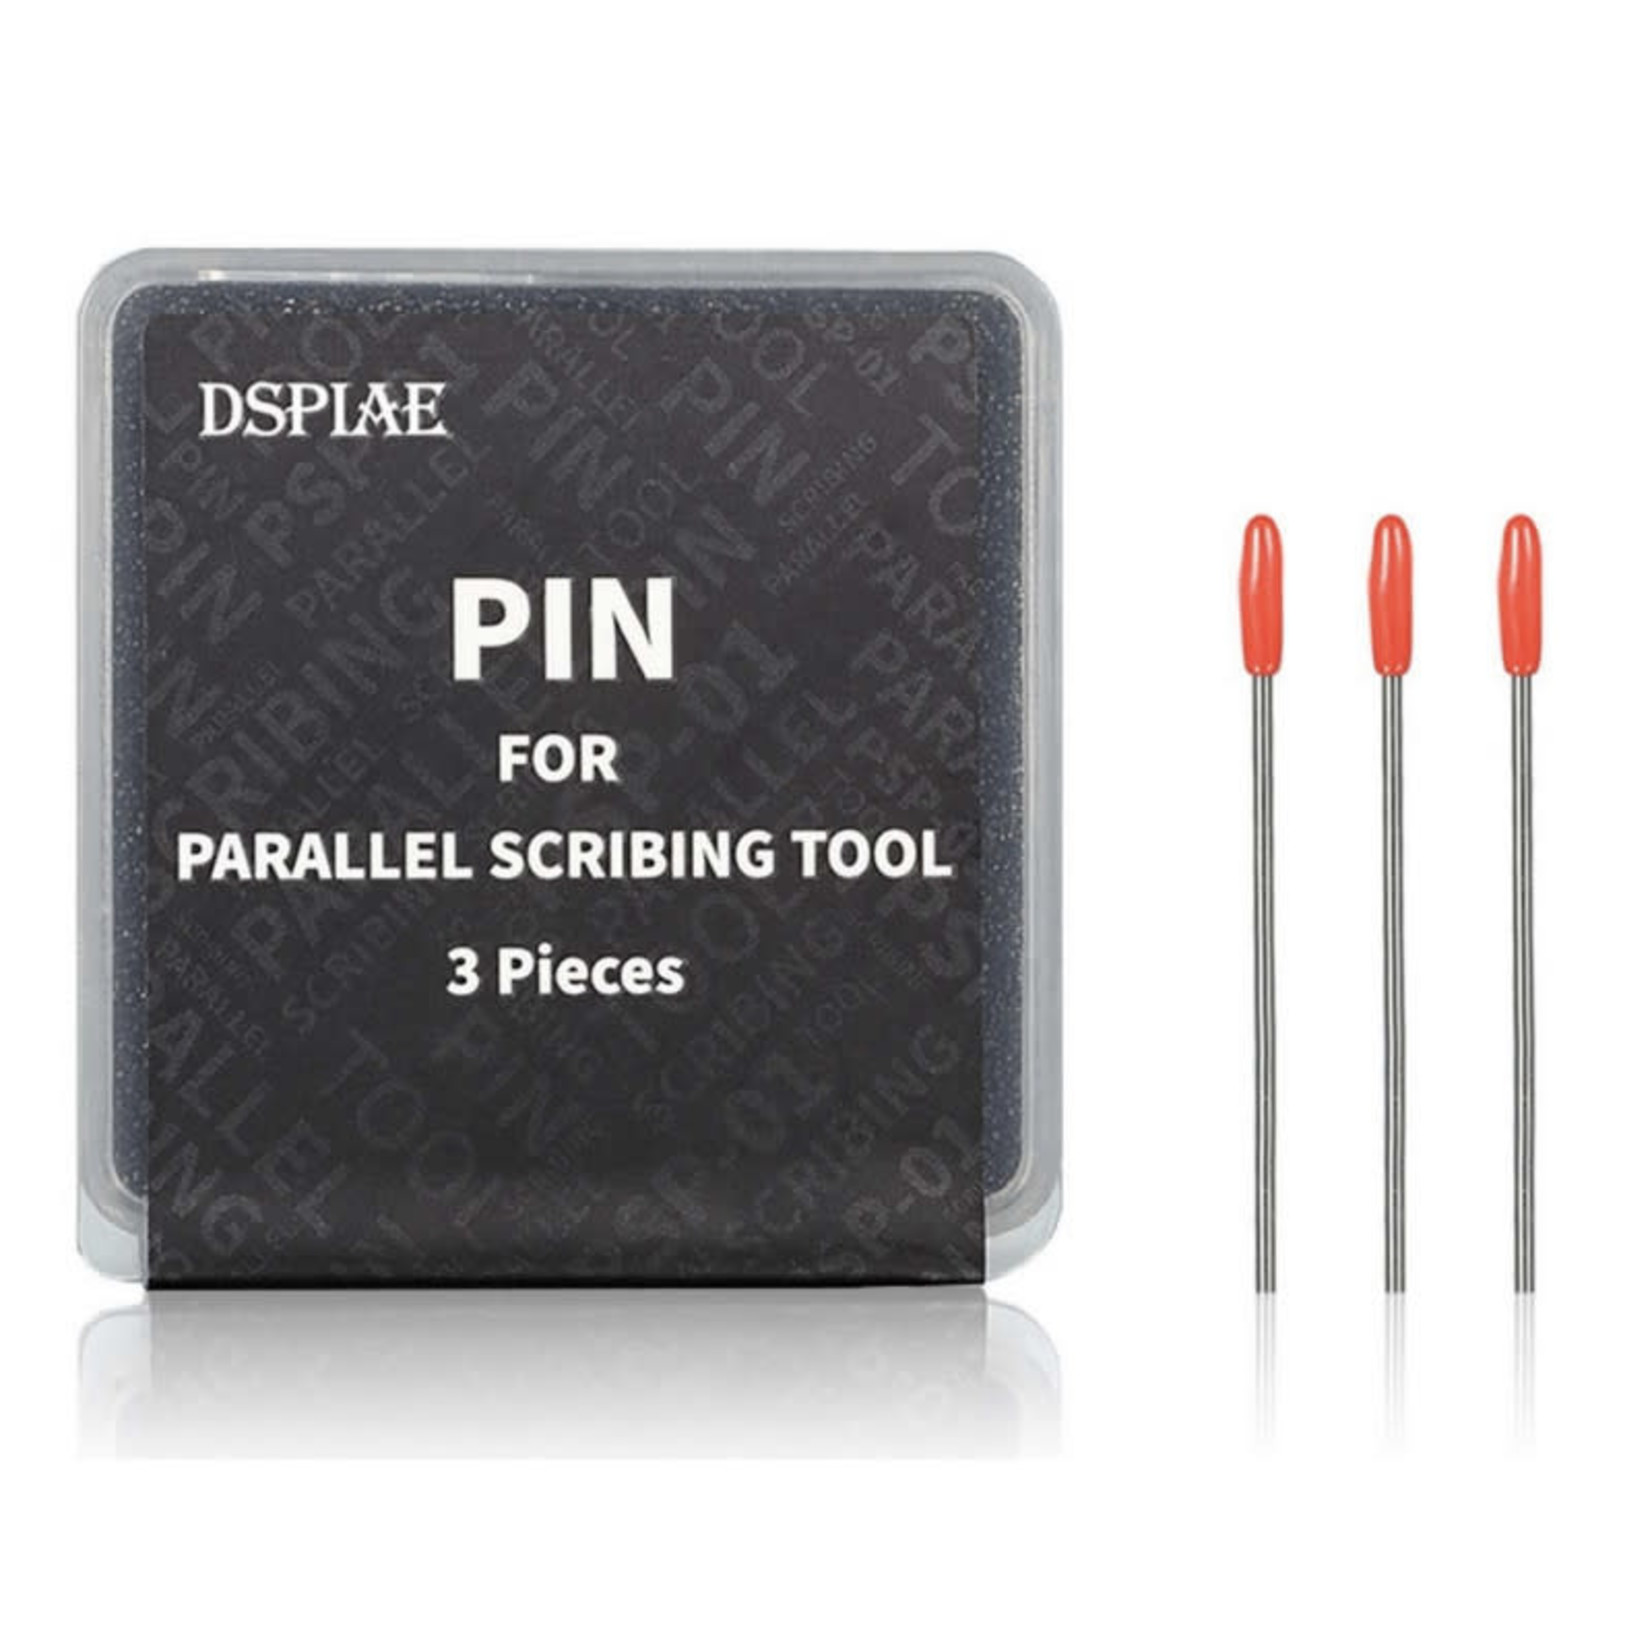 DSPIAE DS-PSP-01 DSPIAE PIN for Parallel Scribing Tool